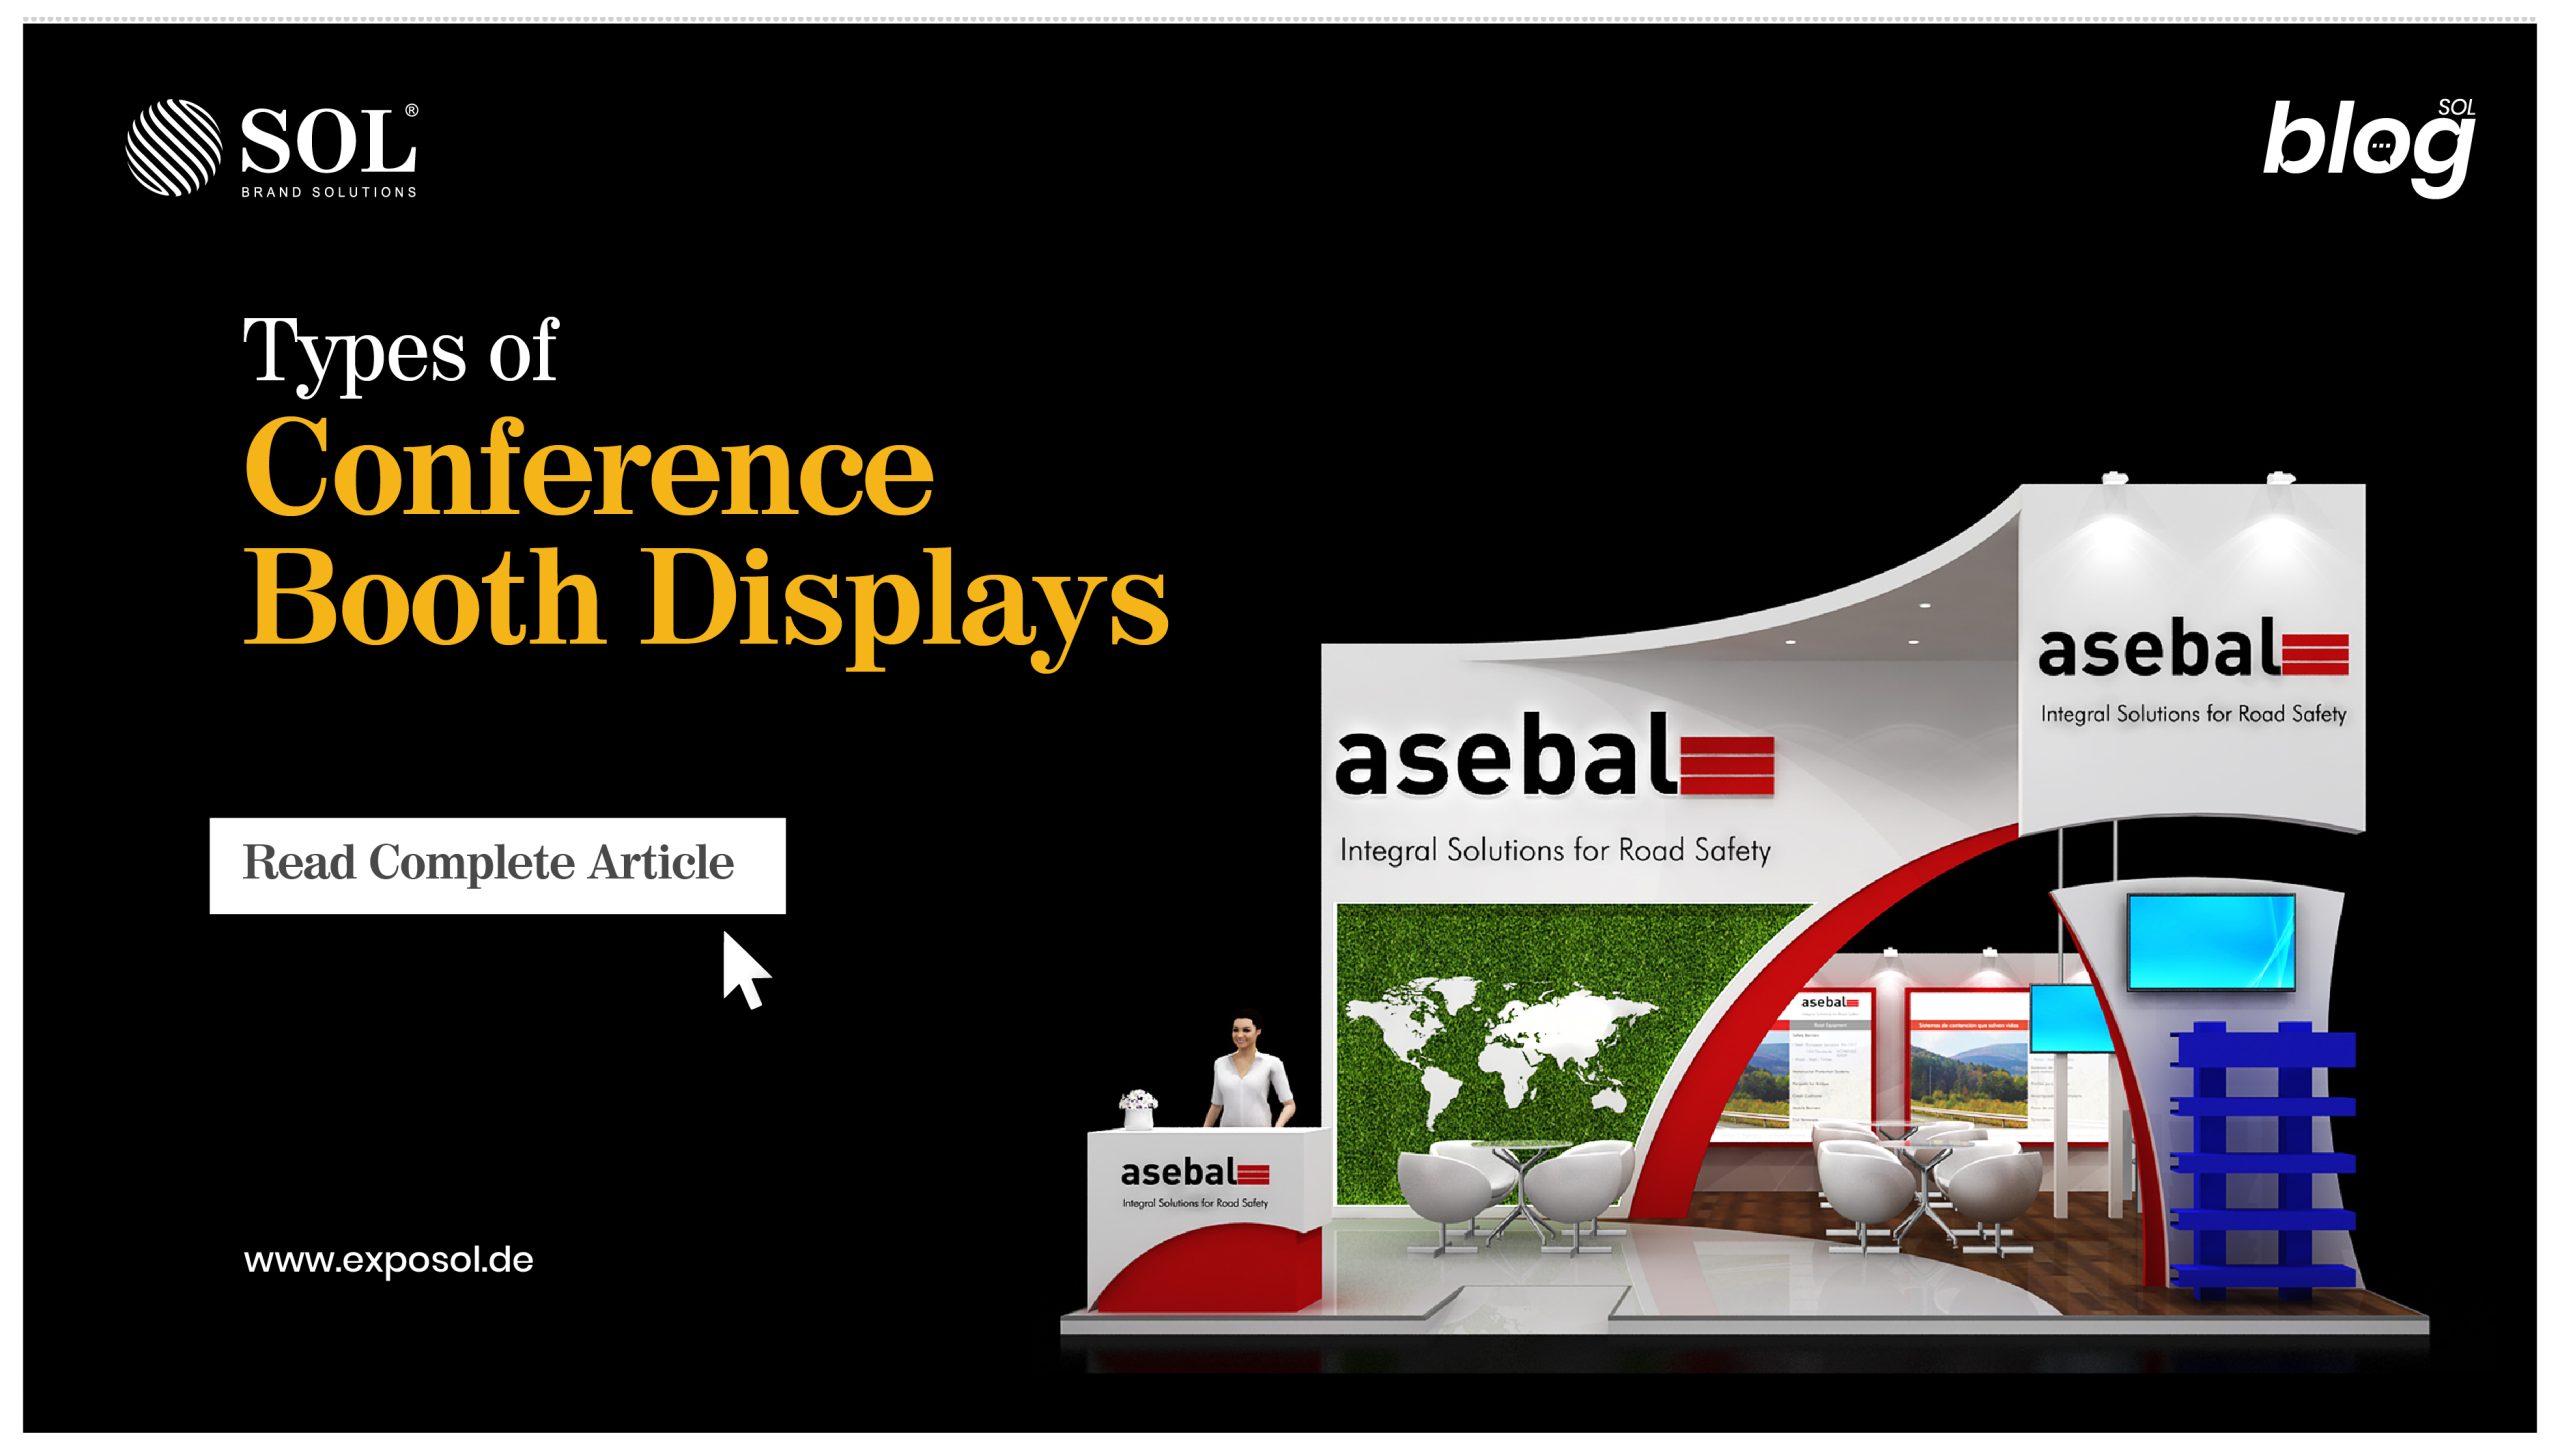 Types of Conference Booth Displays